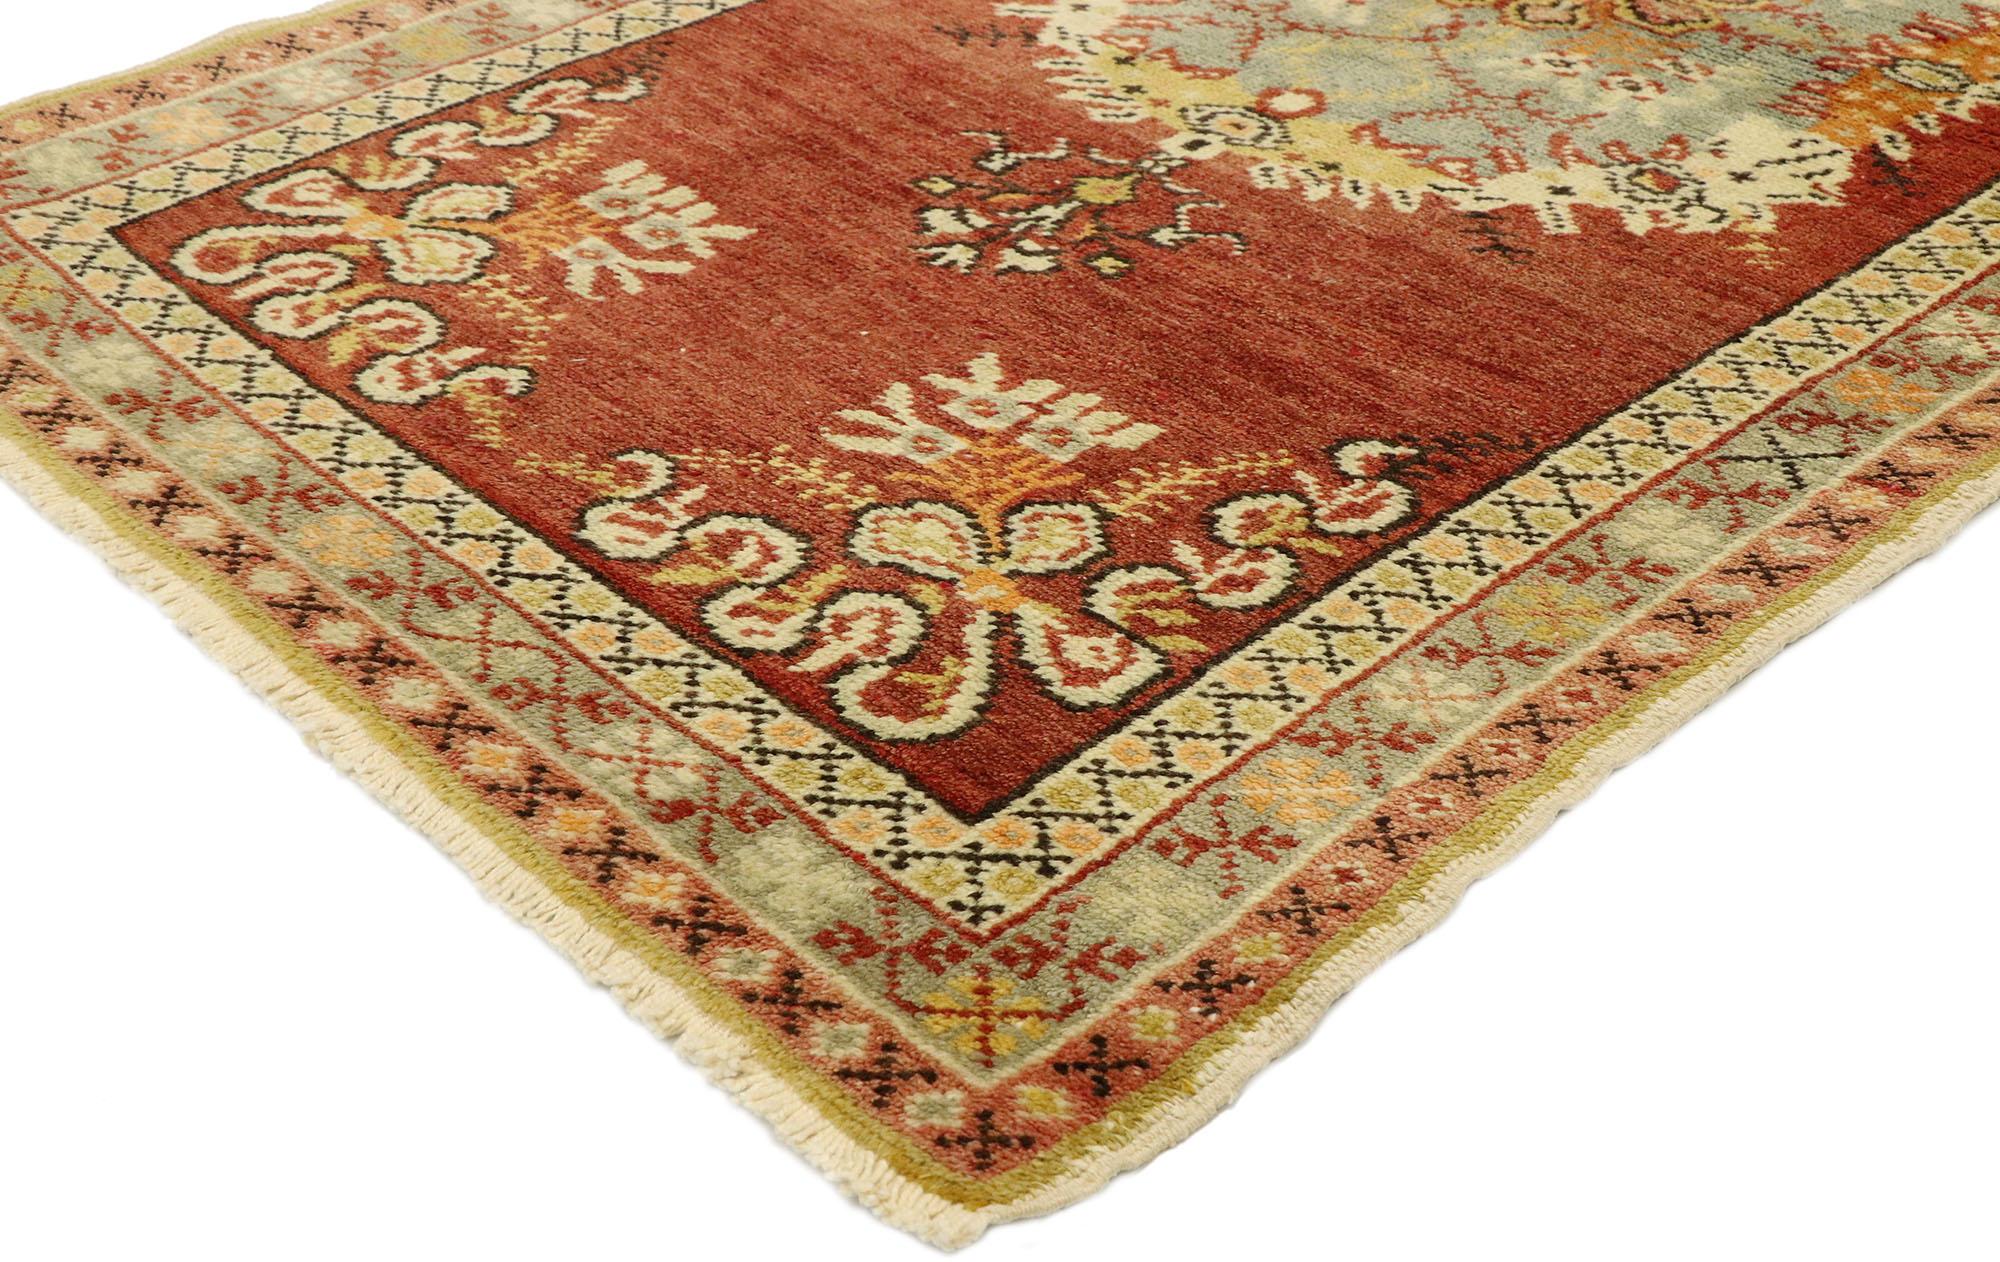 51083, vintage Turkish Oushak rug with Rustic French Rococo style. French Rococo Romanticism meets timeless Anatolian tradition in this Classic style vintage Turkish Oushak rug. Set with an elaborate round-oval medallion against an abrashed rustic